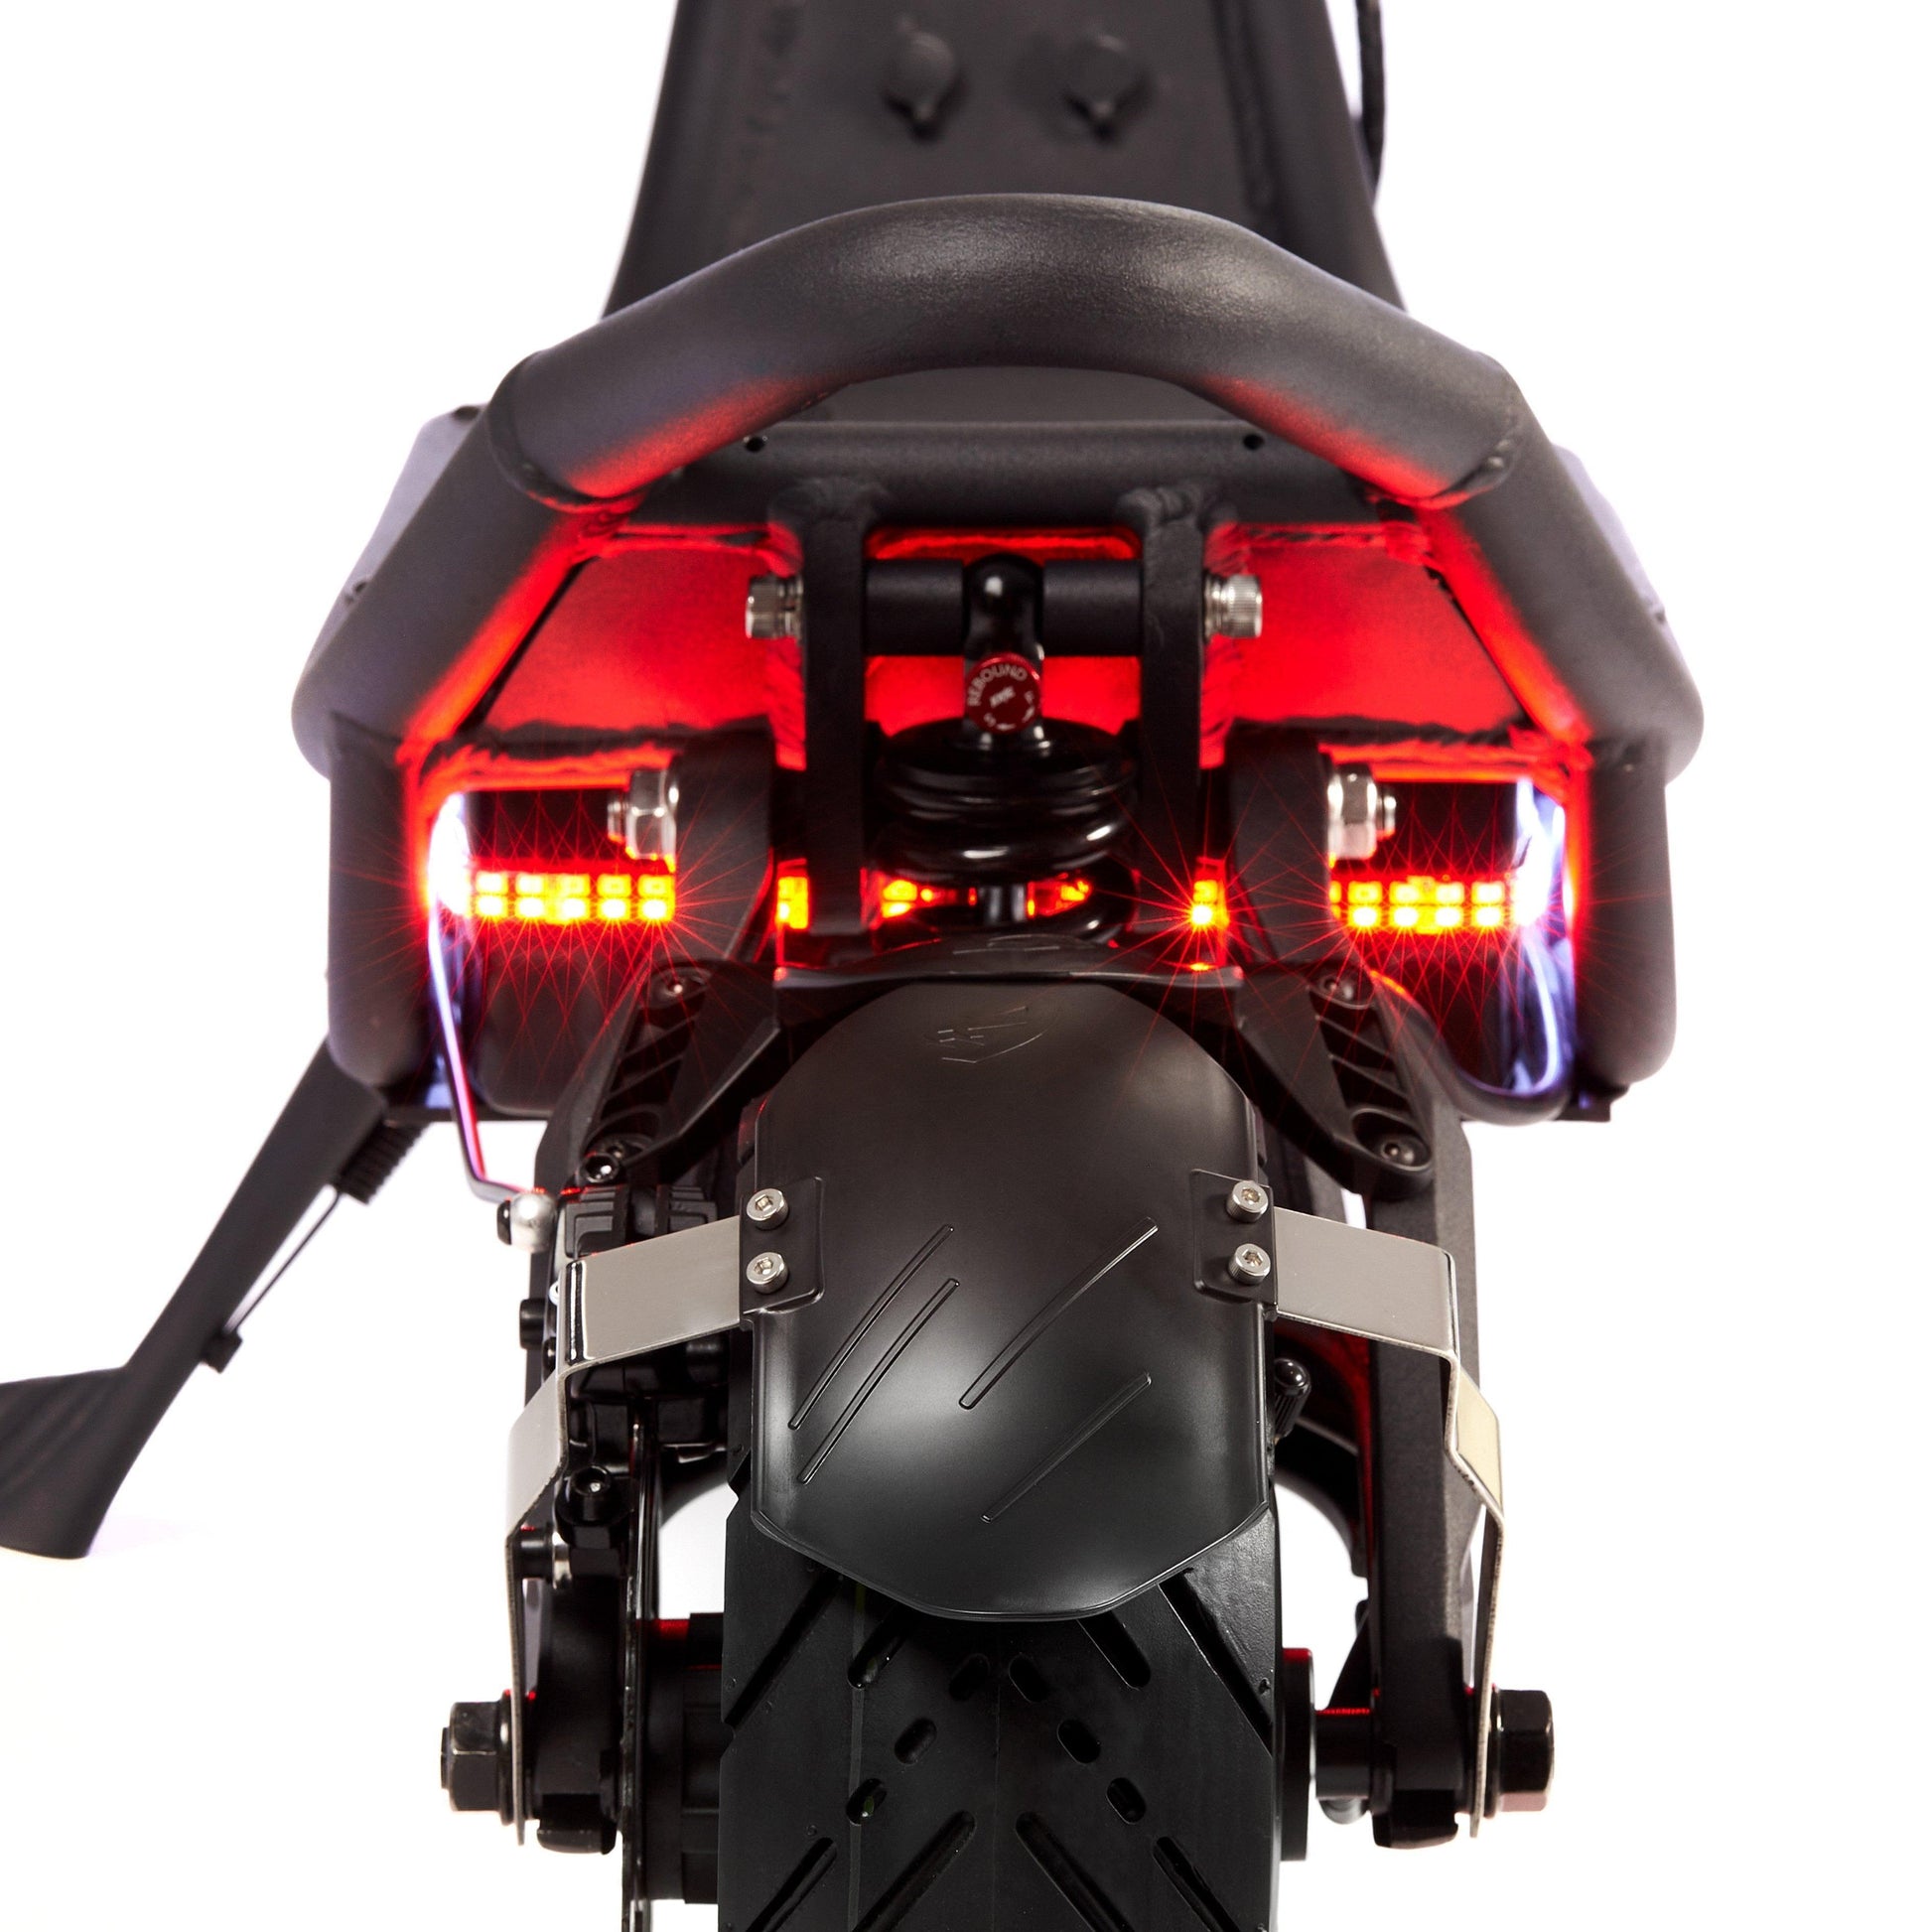 Nami Burn-E 2 Pure - Riding Scooters - Scooters - Electric Monkey NZ